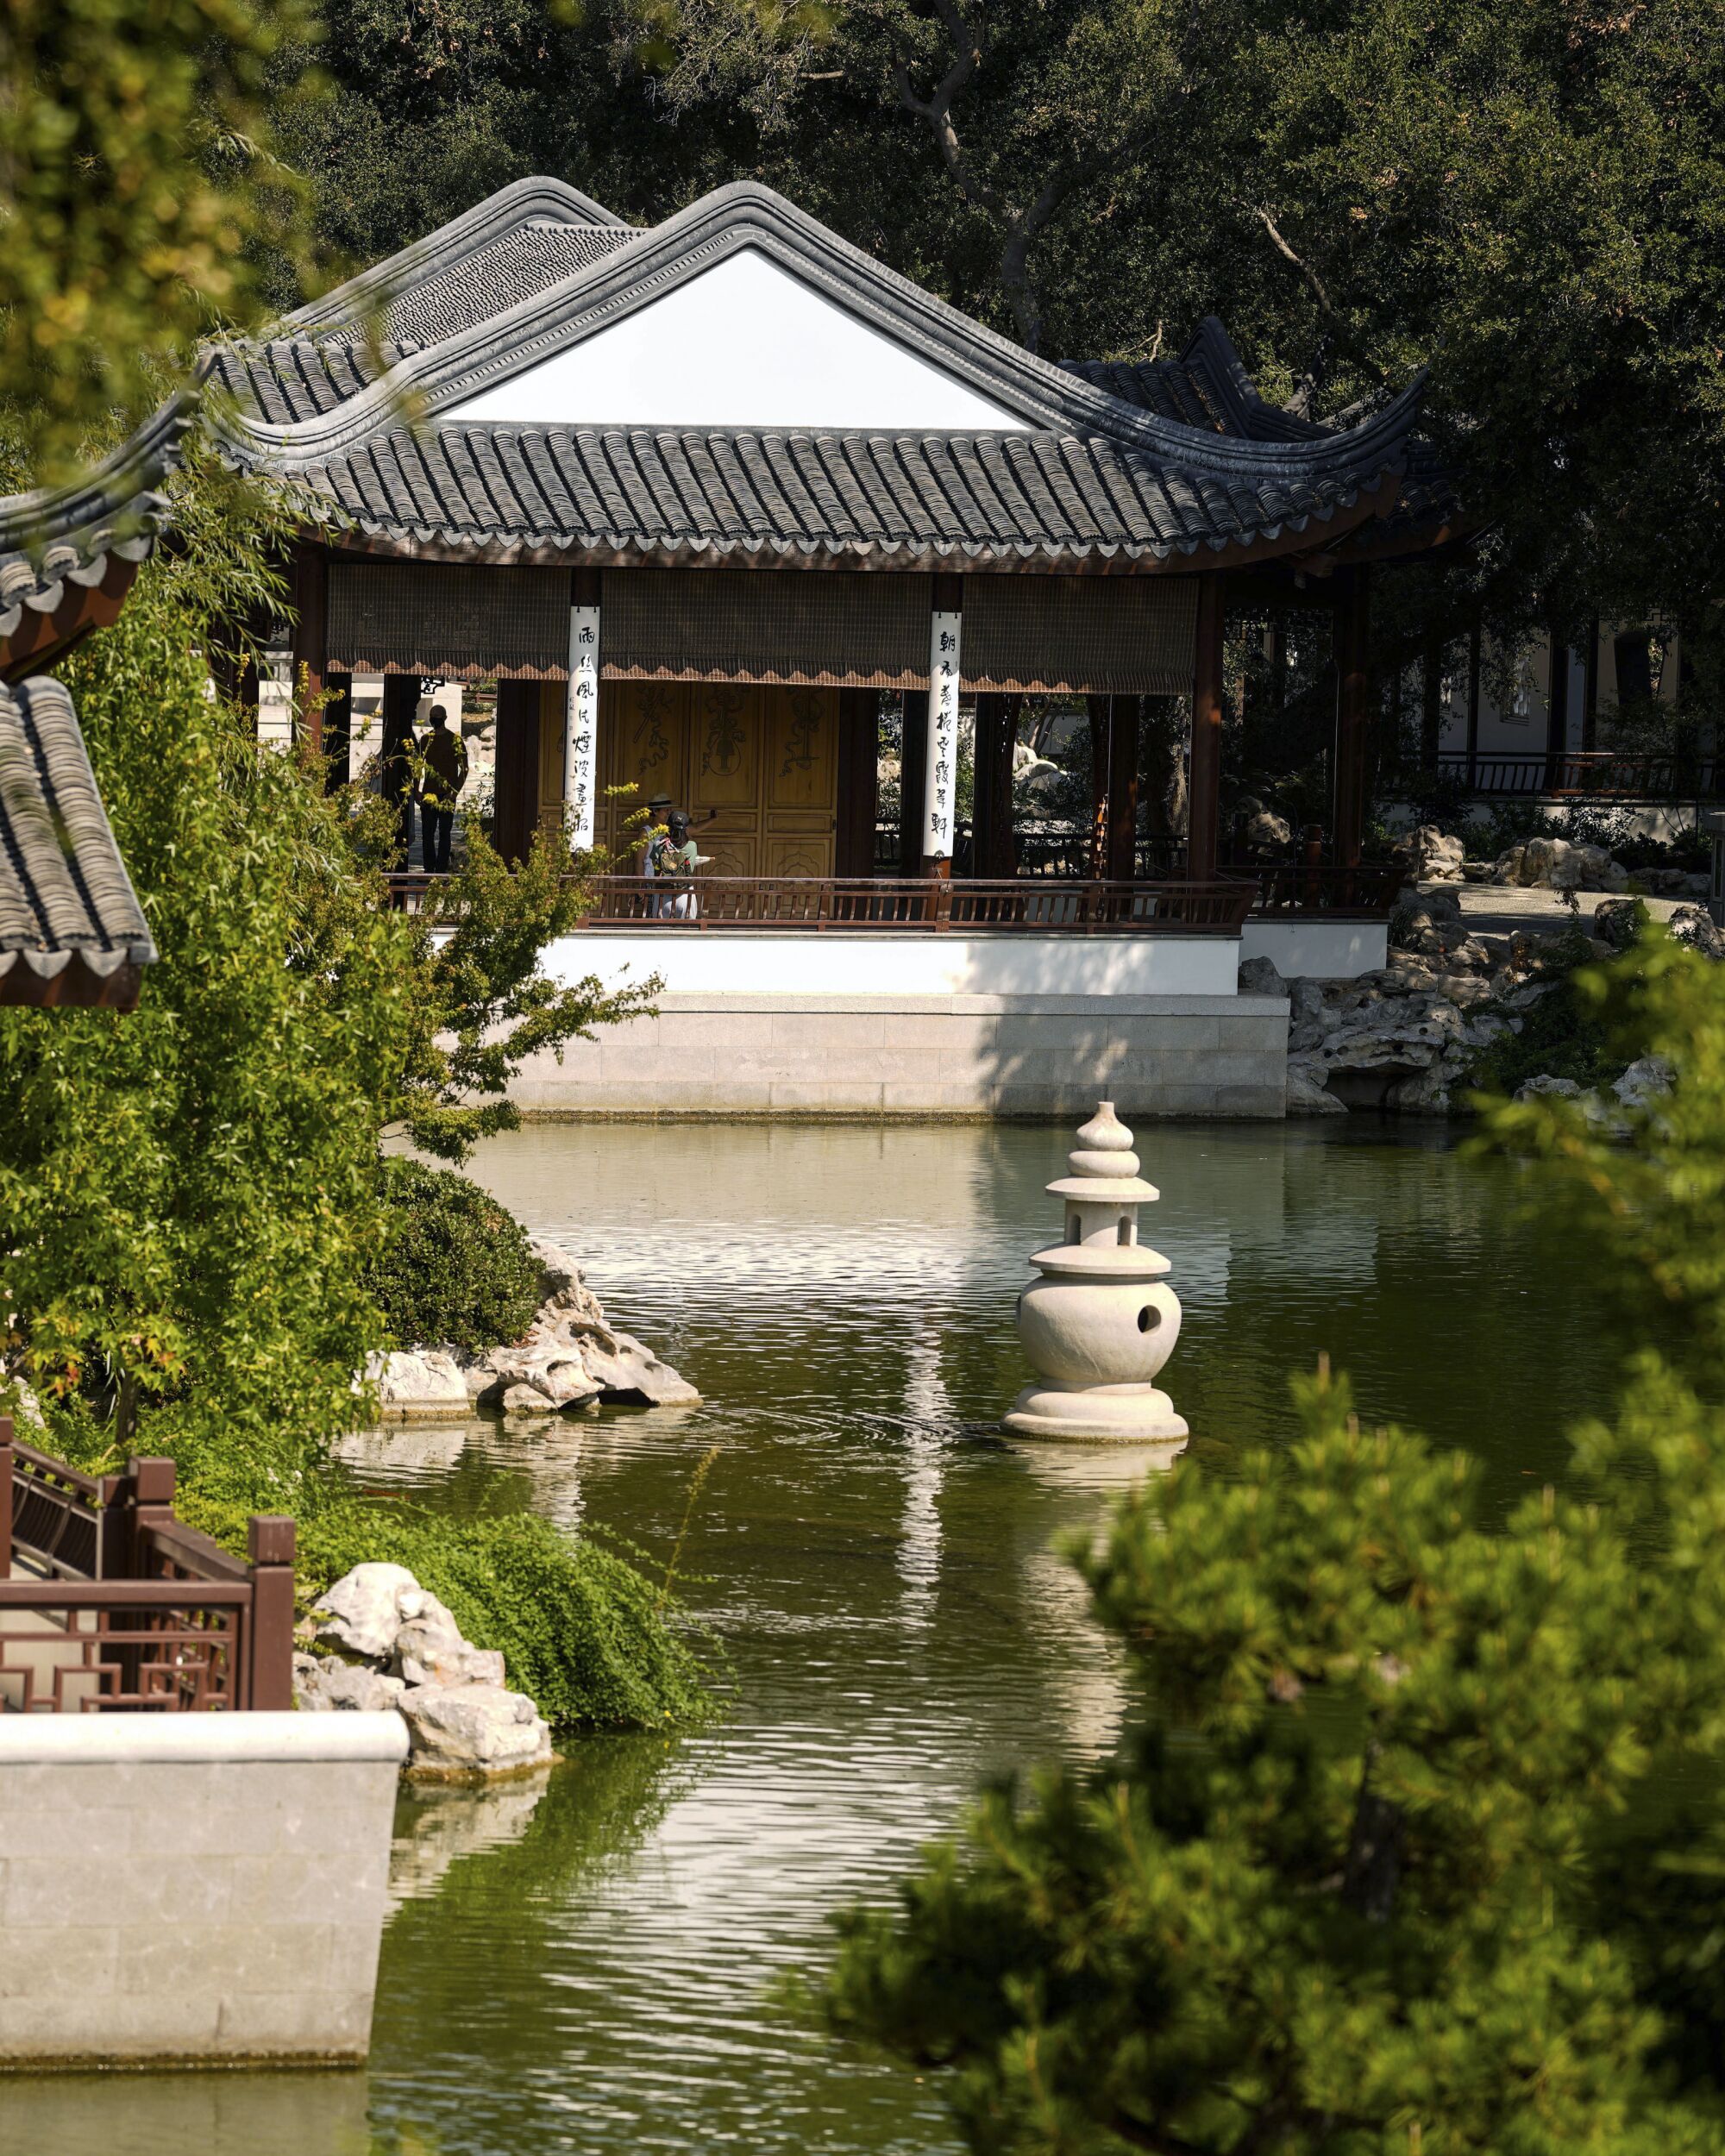 The Chinese Garden at the Huntington Library, Art Museum, and Botanical Gardens